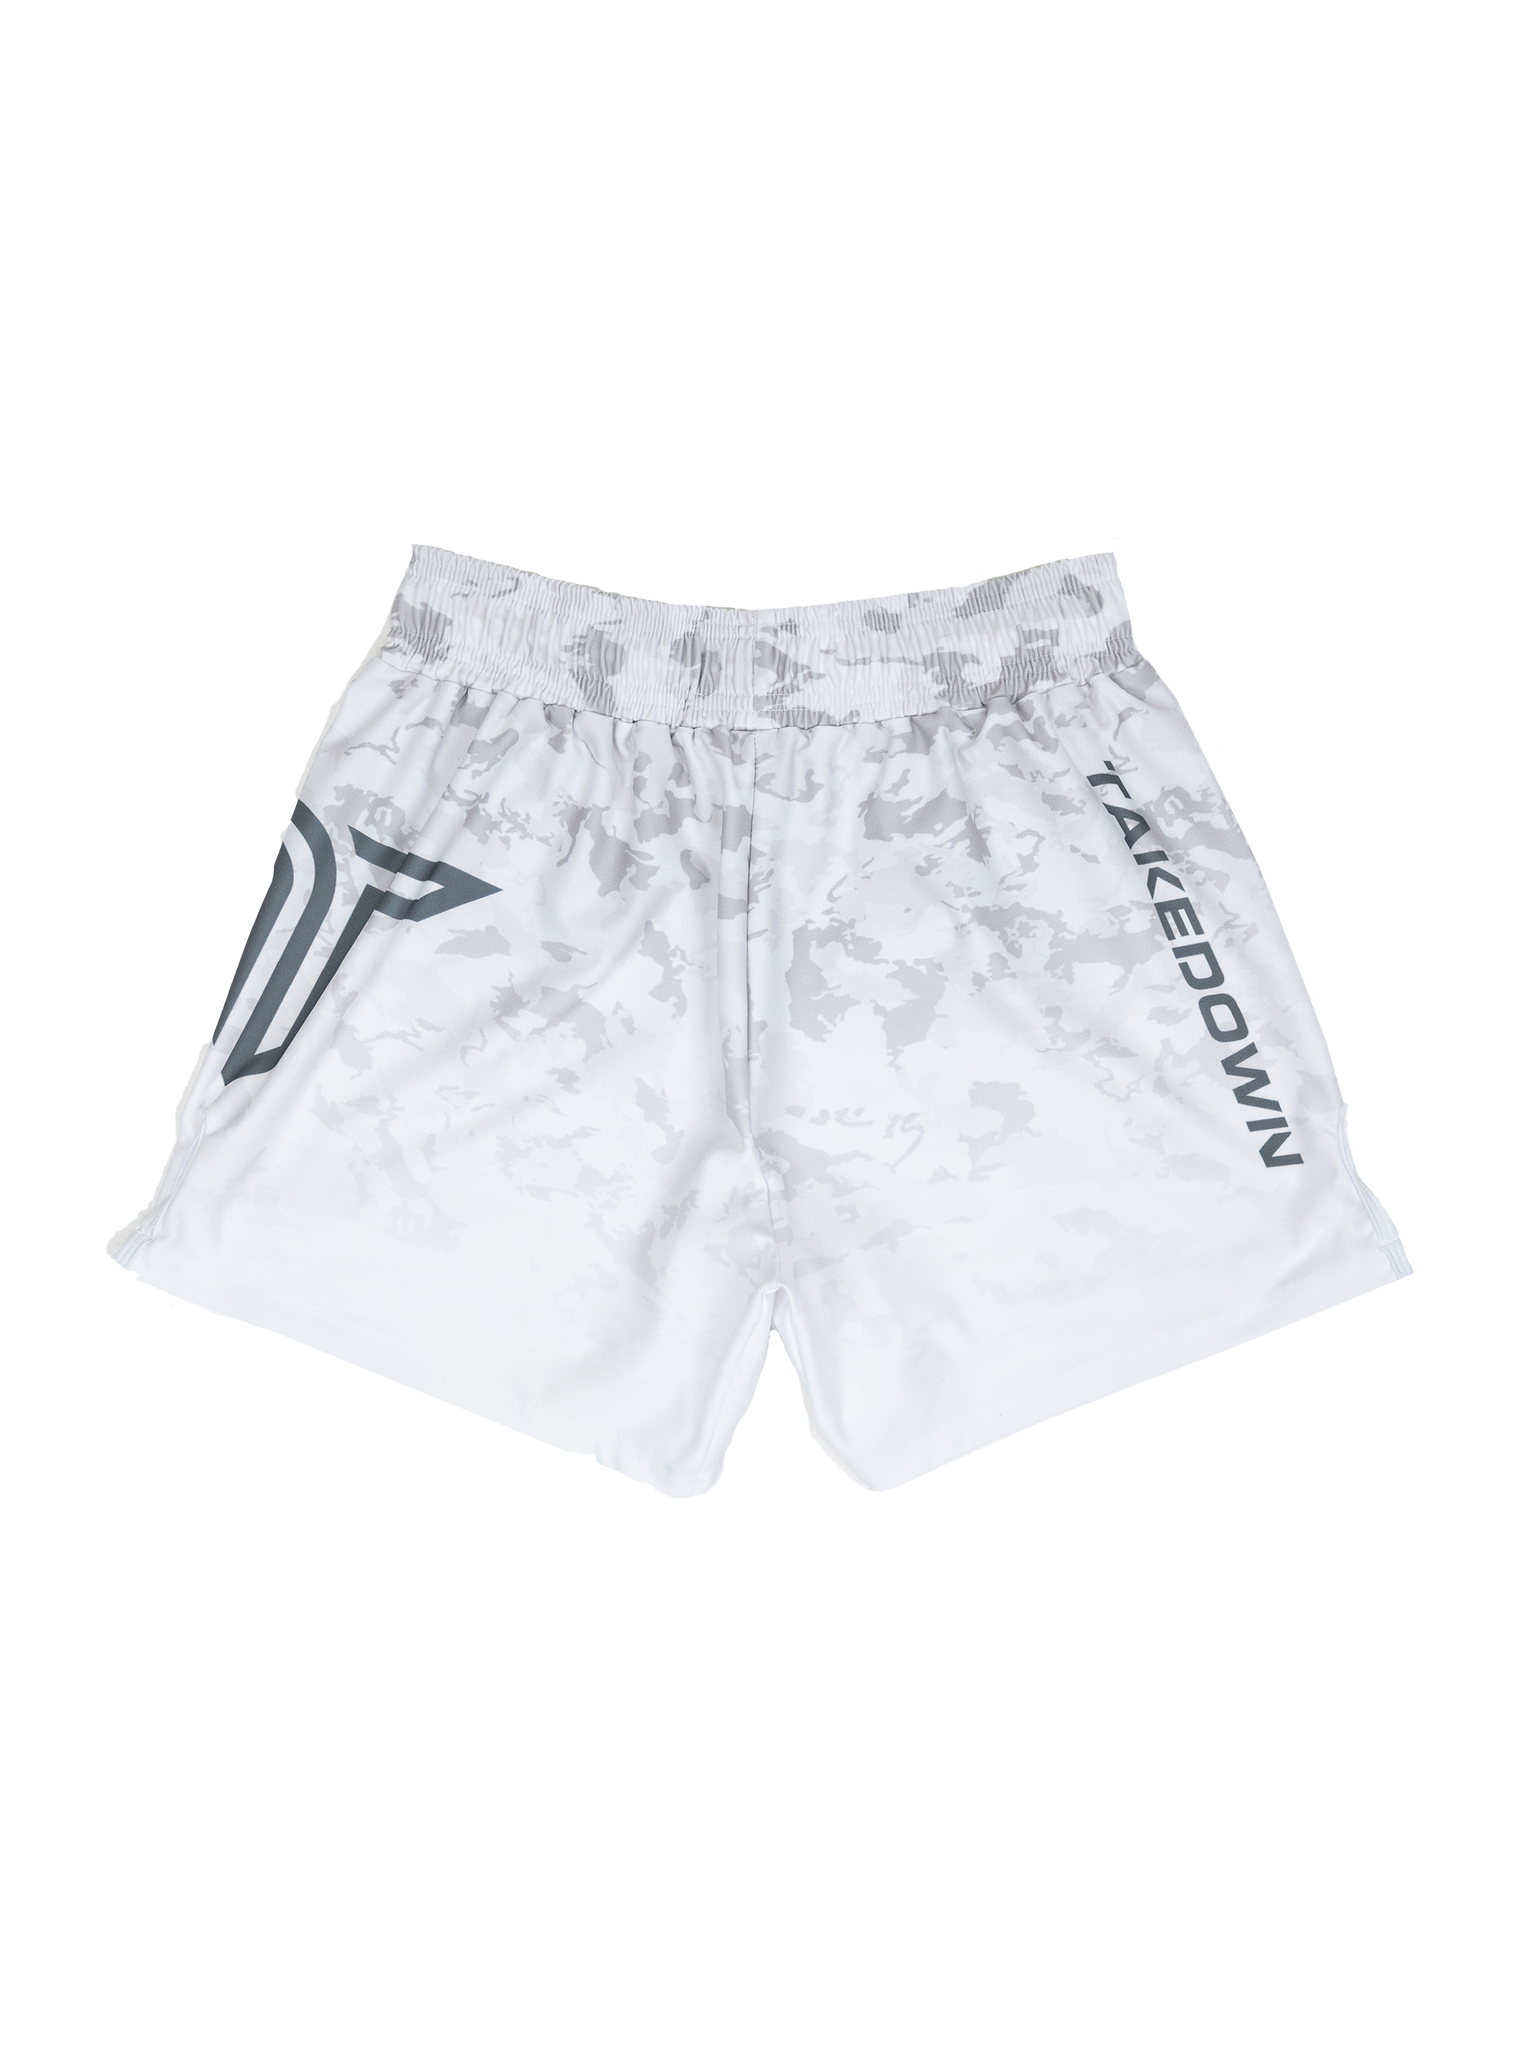 Particle Camo Fight Shorts - Ghost Grey (5"&7" Inseam)